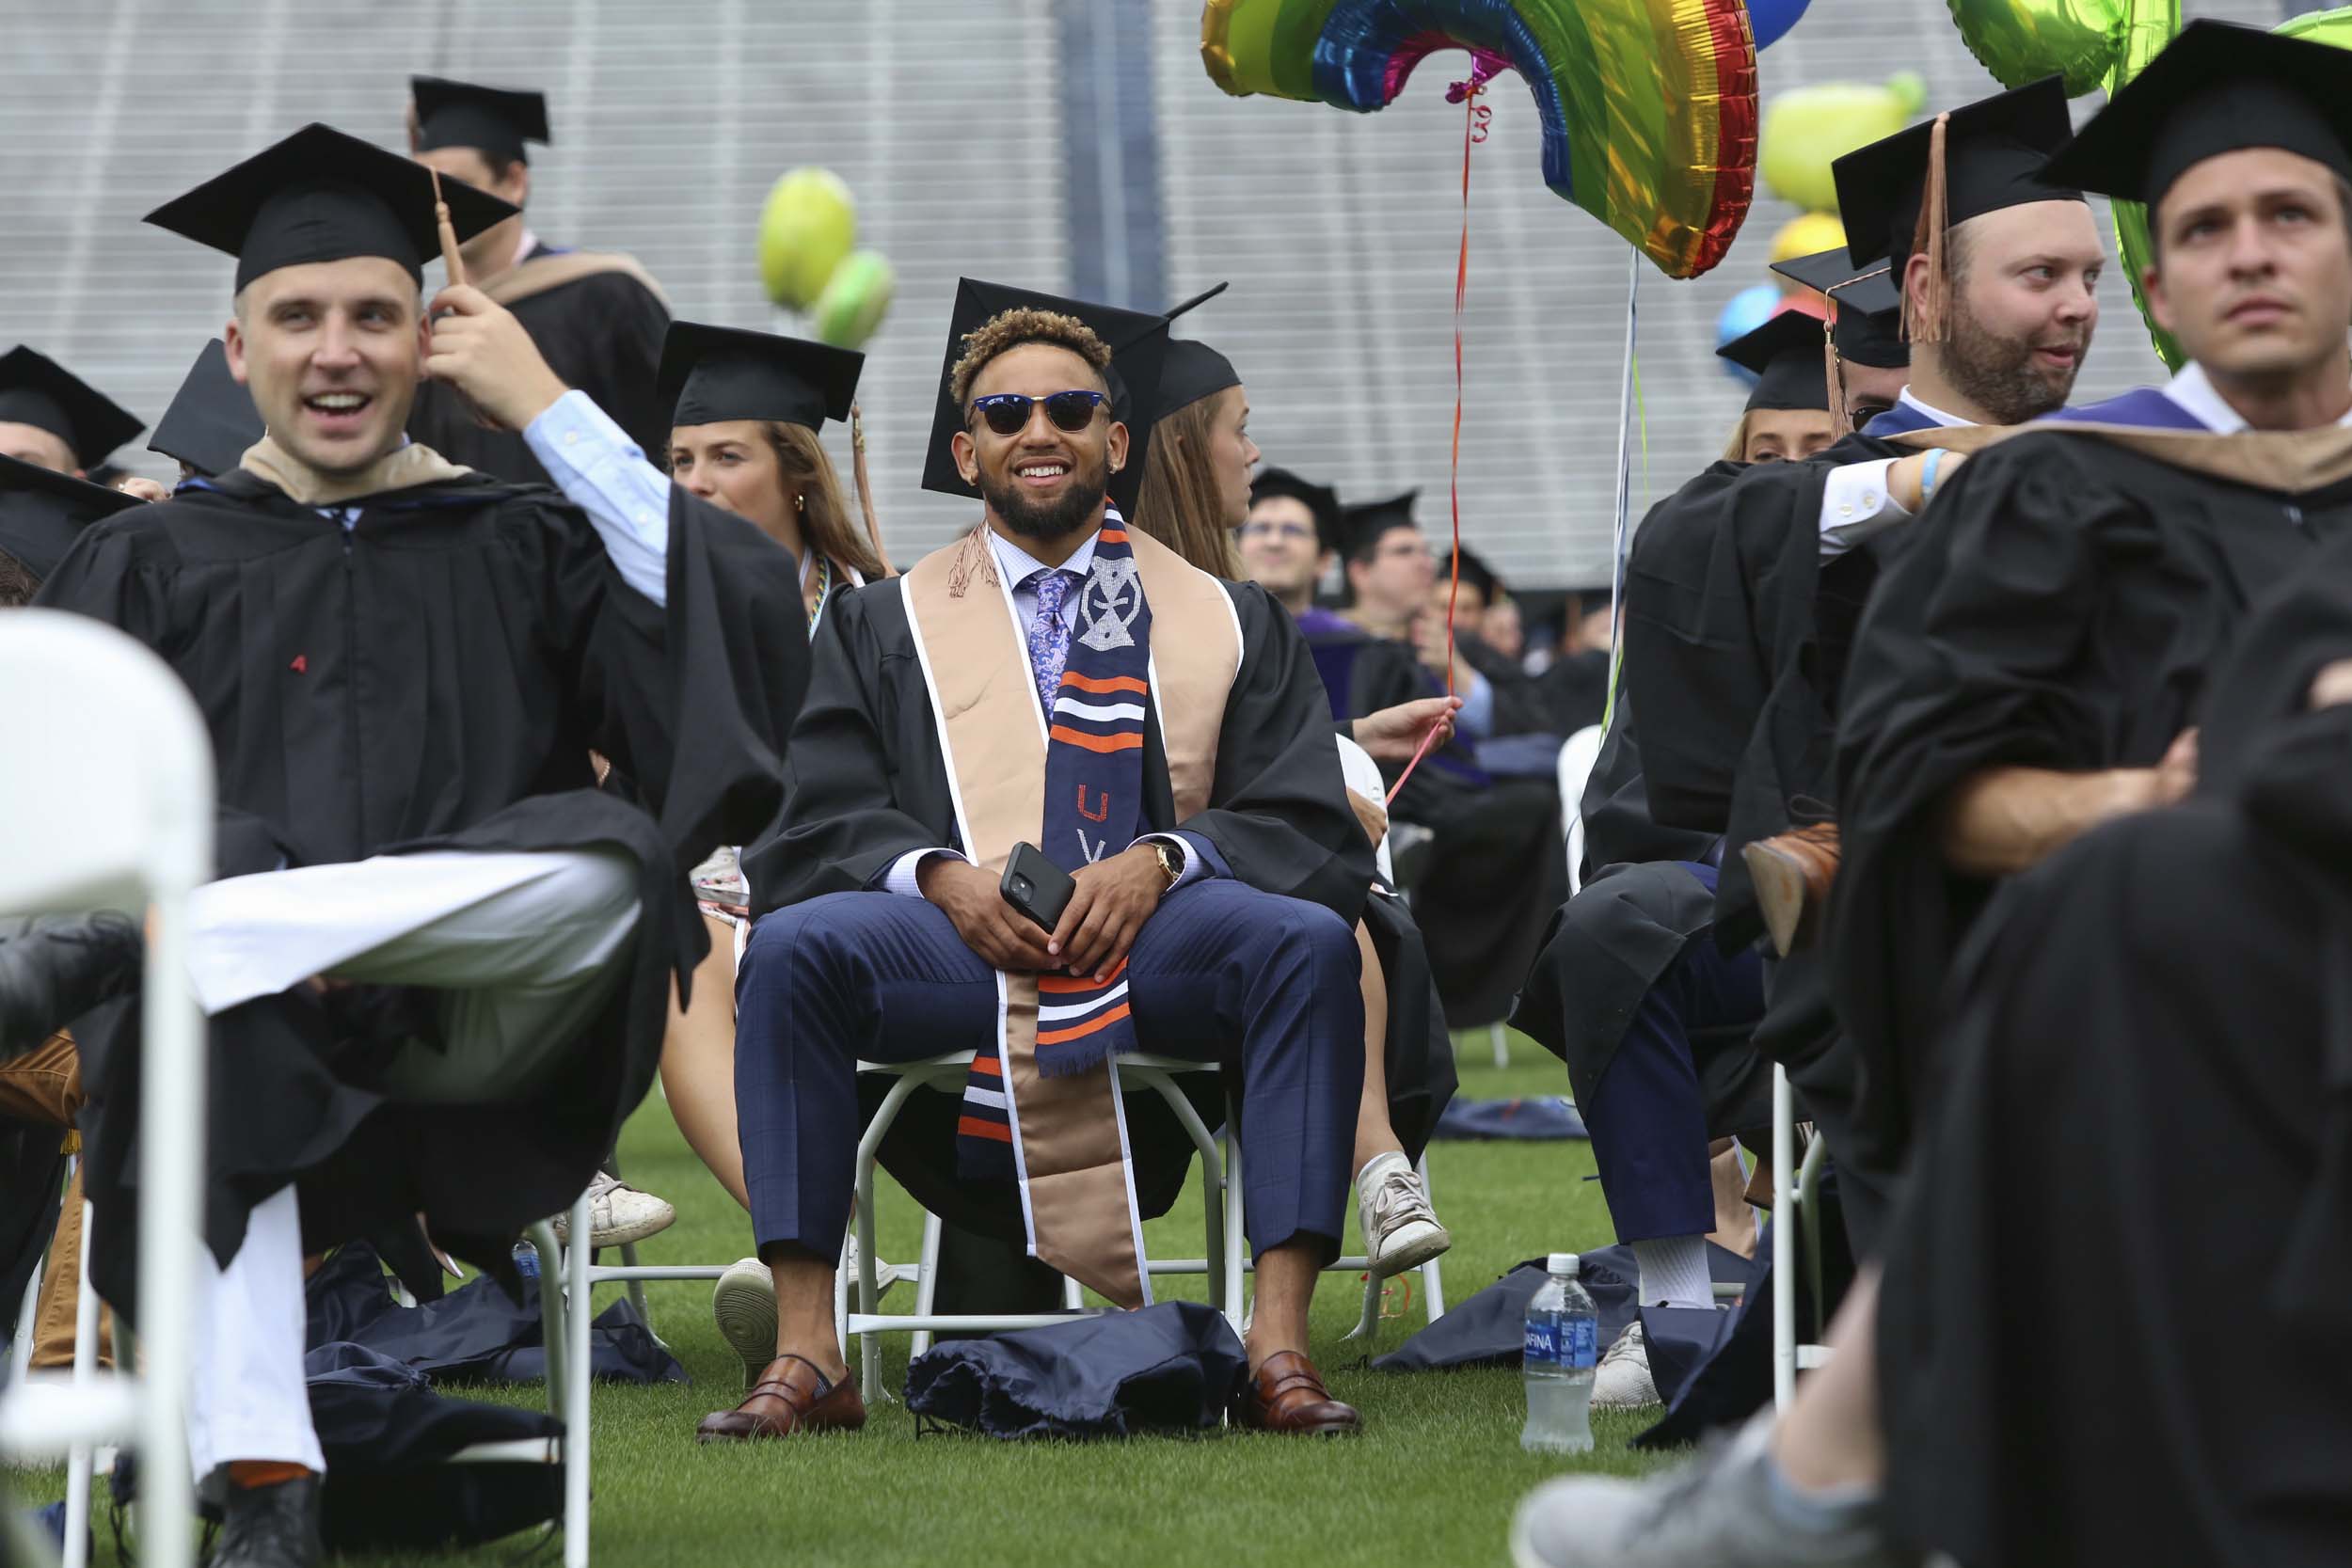 Graduates sitting in socially distanced chairs